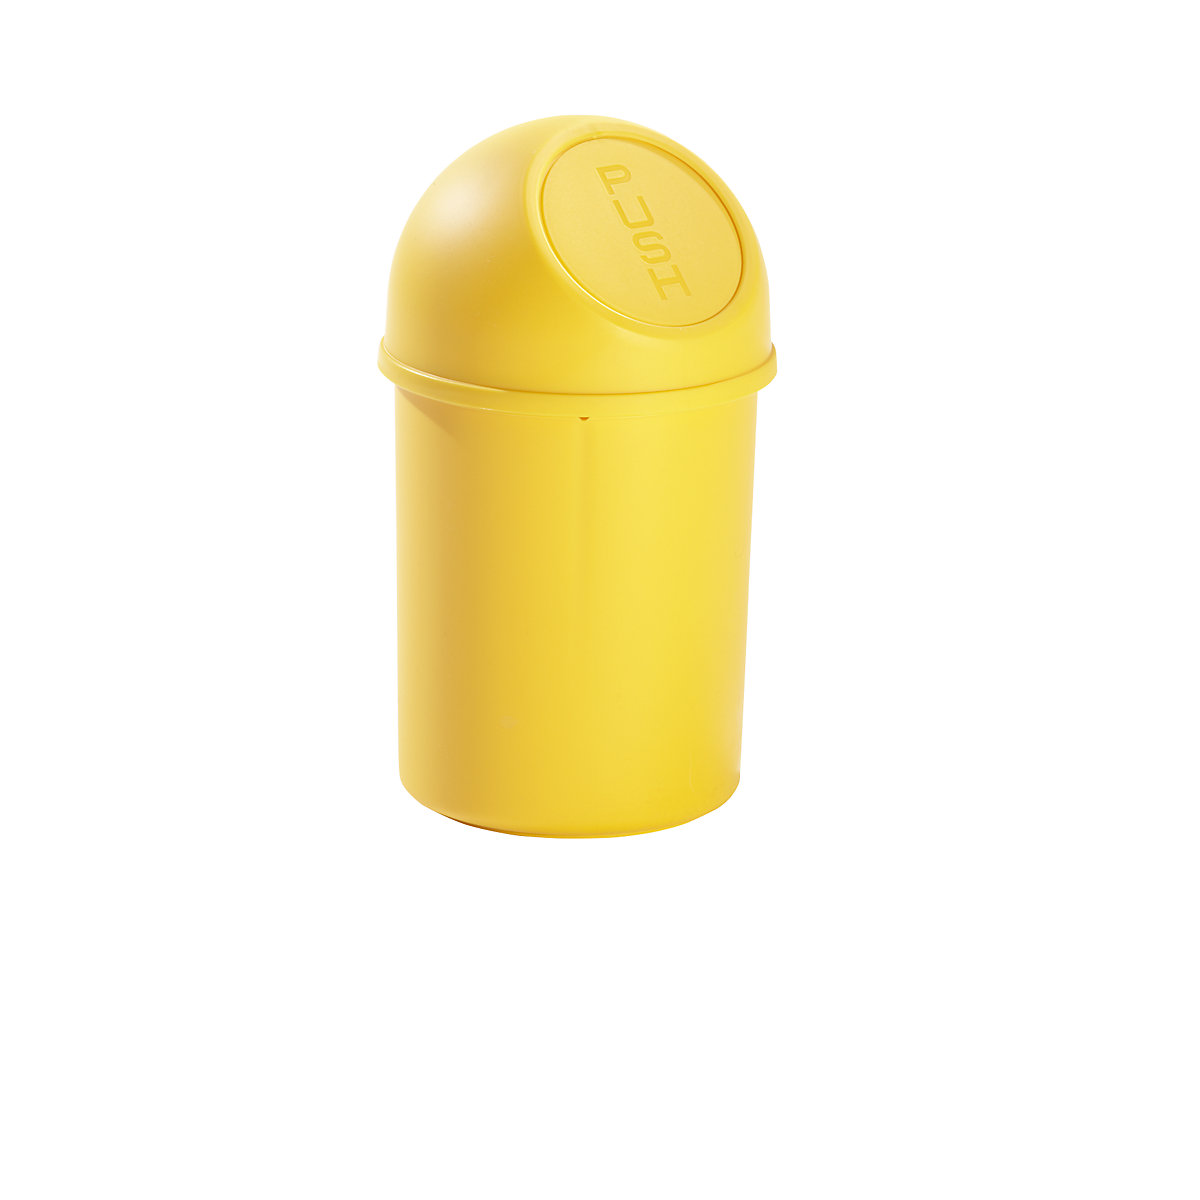 Push top waste bin made of plastic – helit, capacity 6 l, pack of 6, HxØ 375 x 216 mm, yellow-5